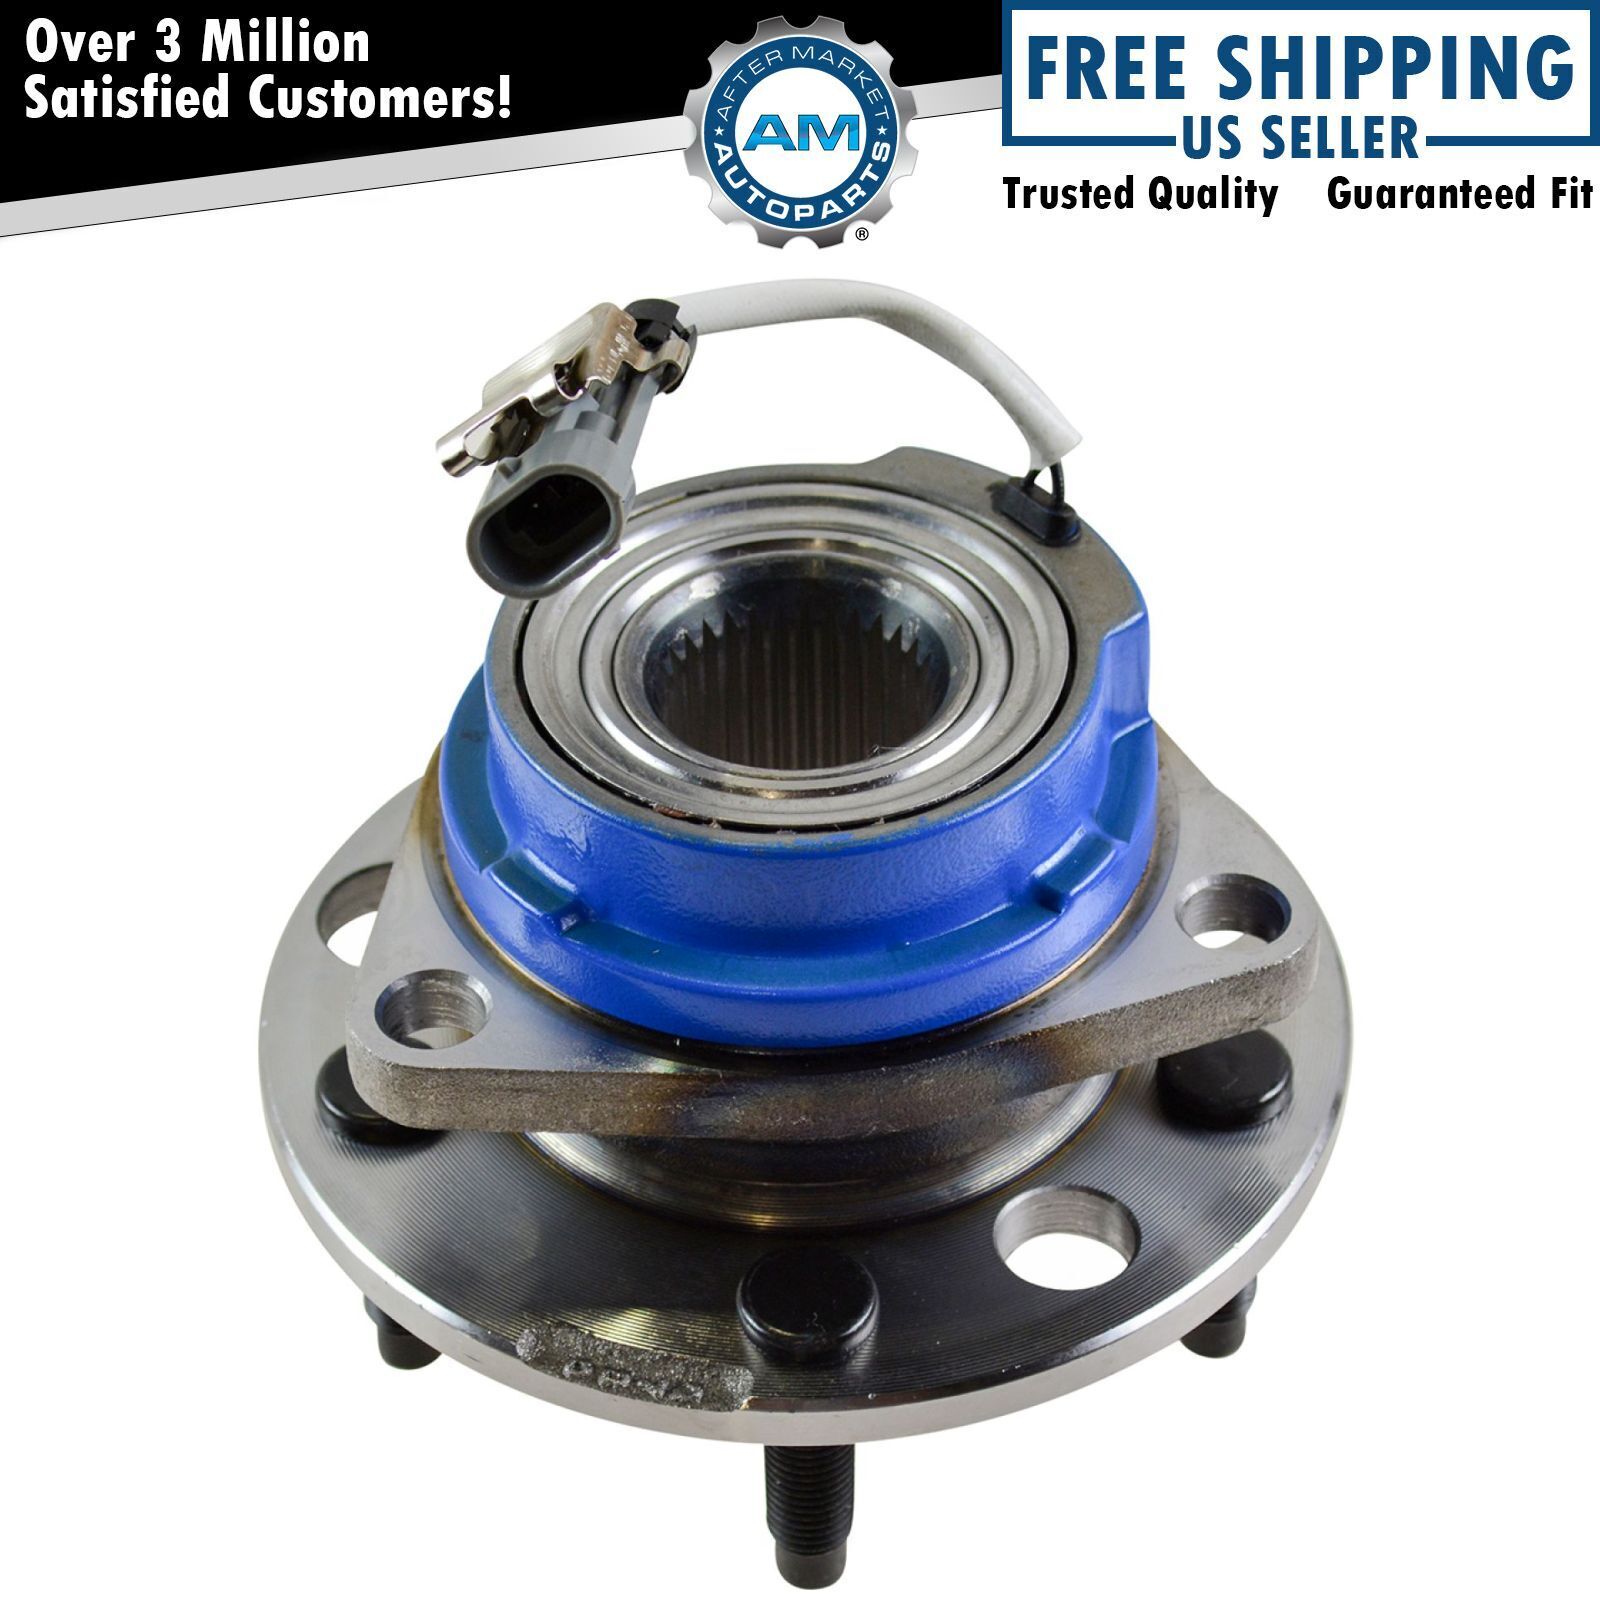 (1) Front Wheel Hub & Bearing ABS for 1992 - 1999 Chevy Buick Cadillac Pontiac